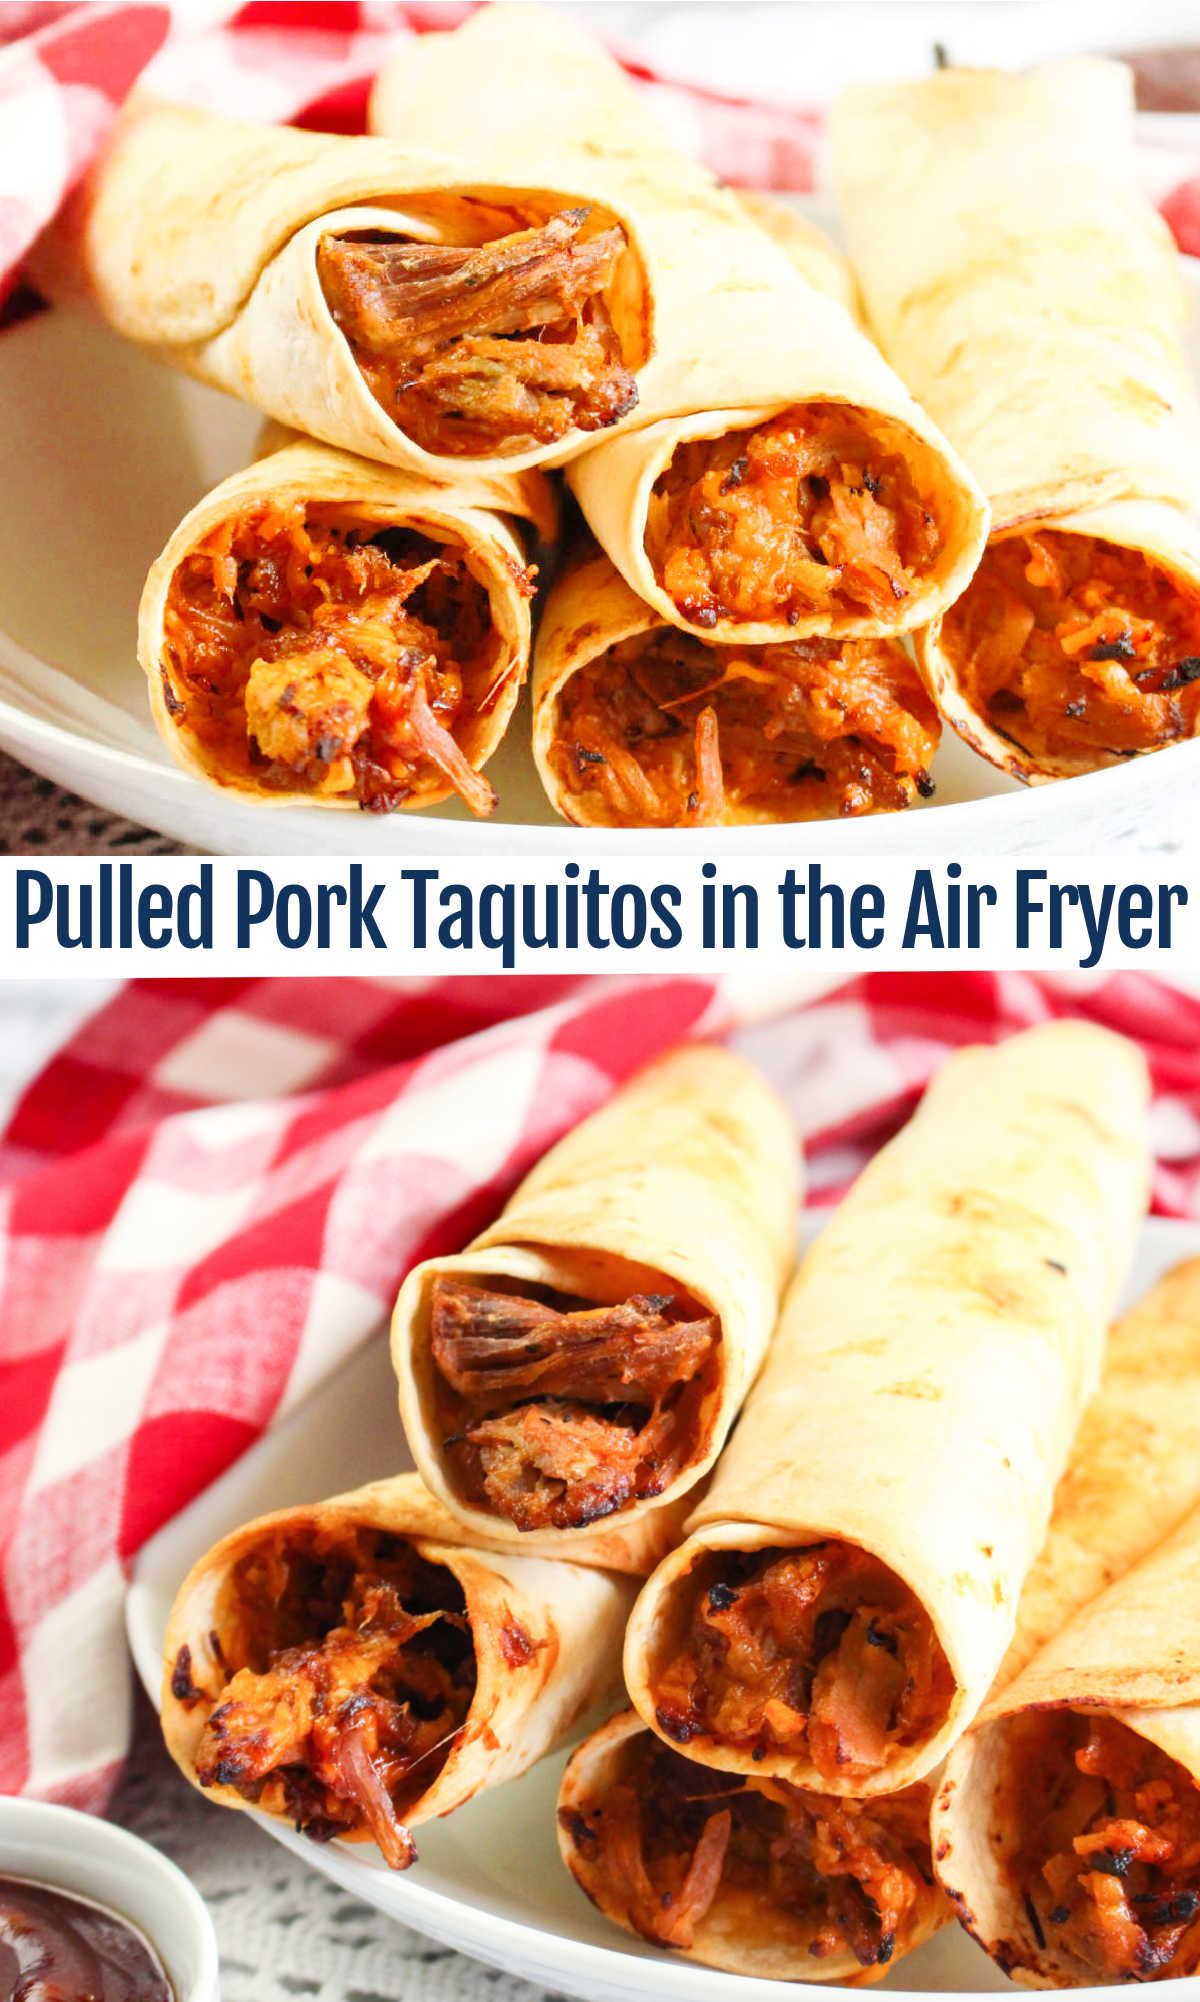 Turn leftovers into fun cheesy pulled pork taquitos with the help of your air fryer. They are easy to make, crispy and delicious!